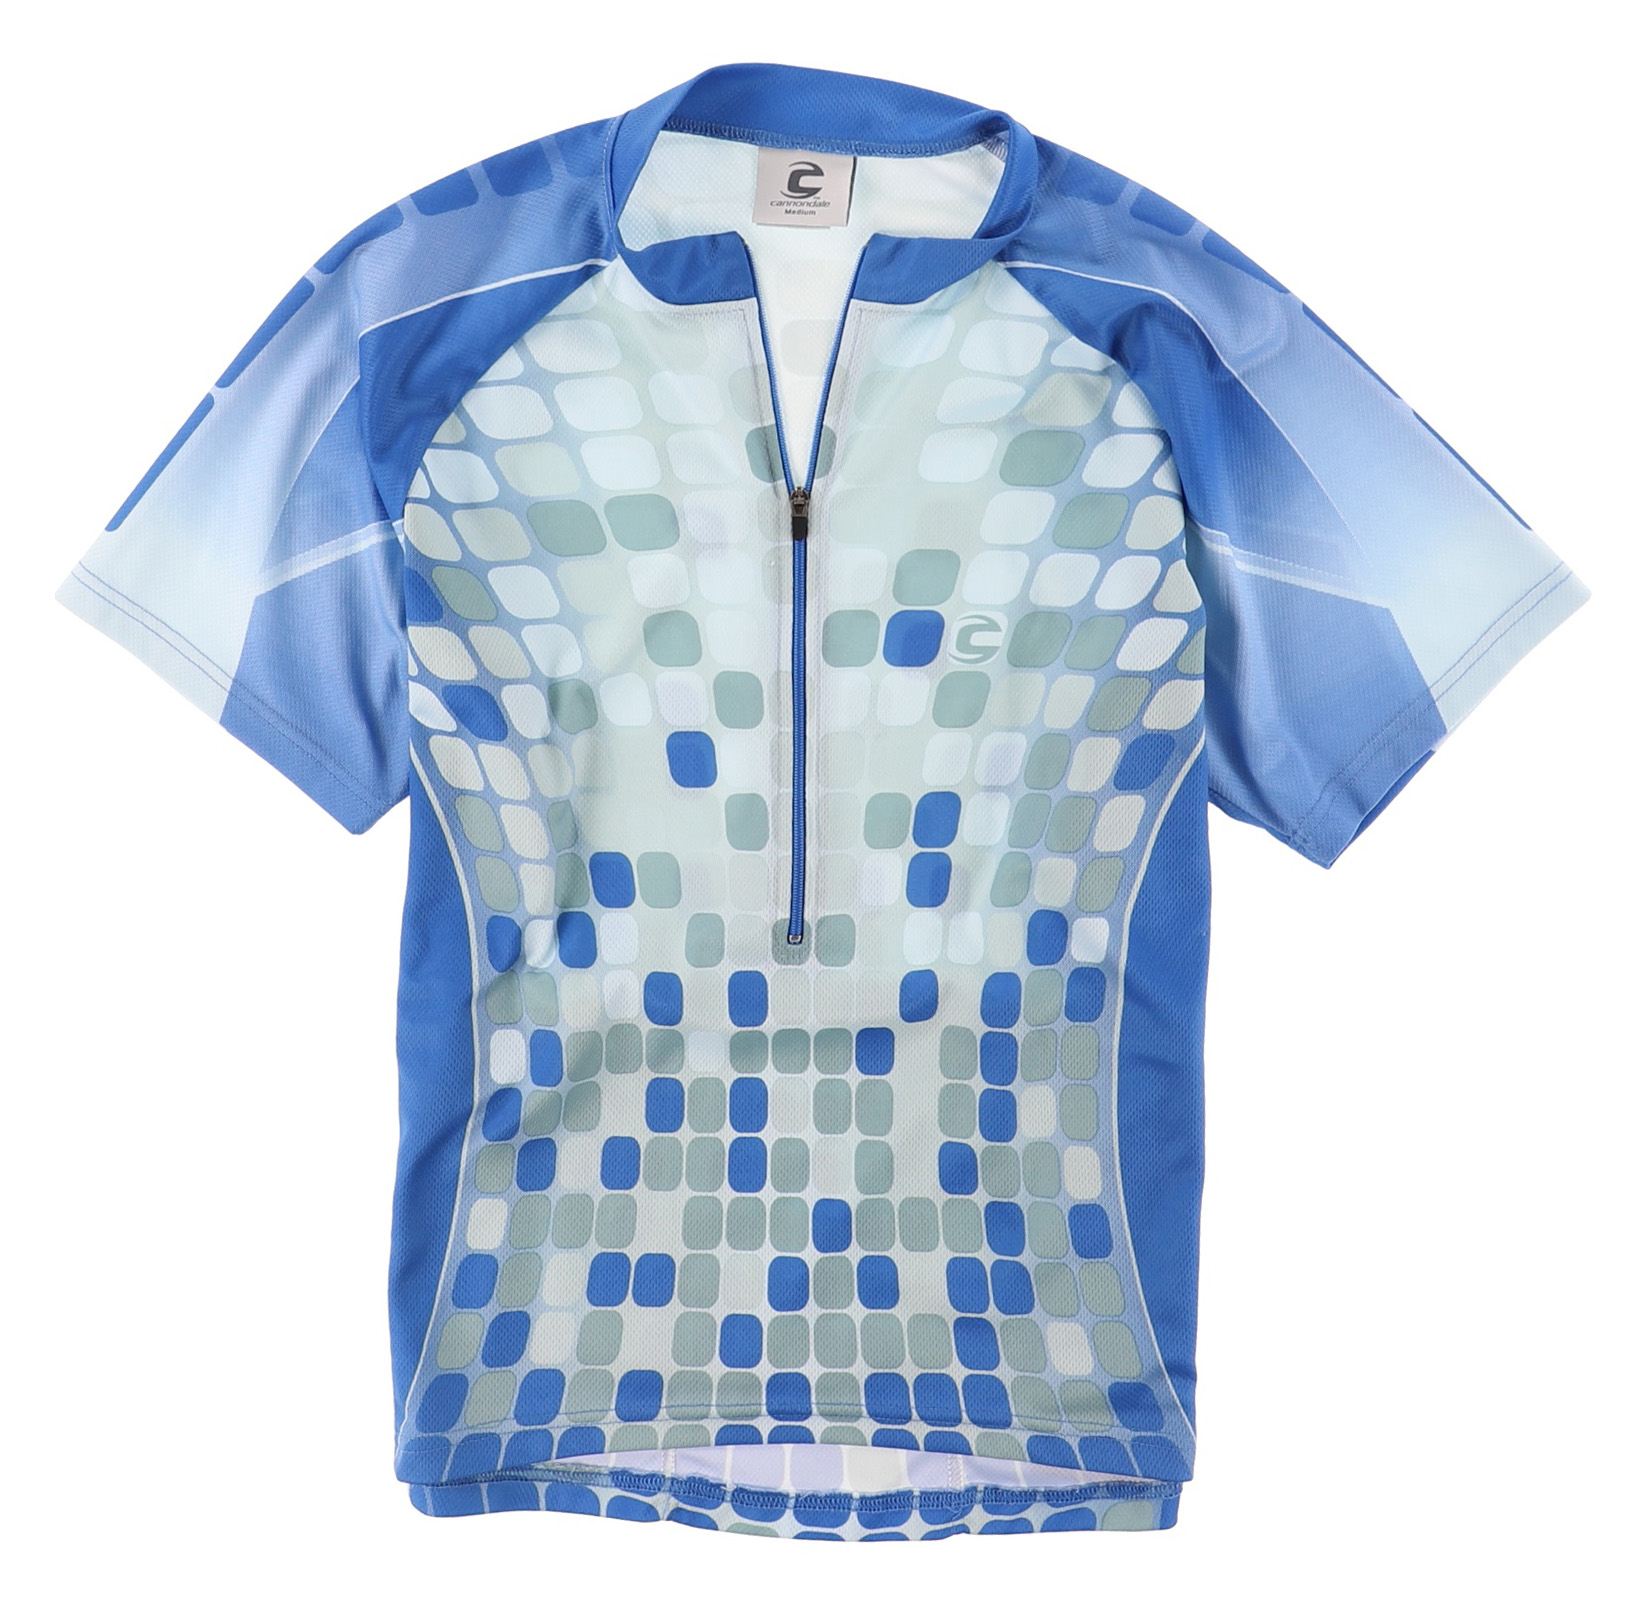 CANNONDALE JERSEY